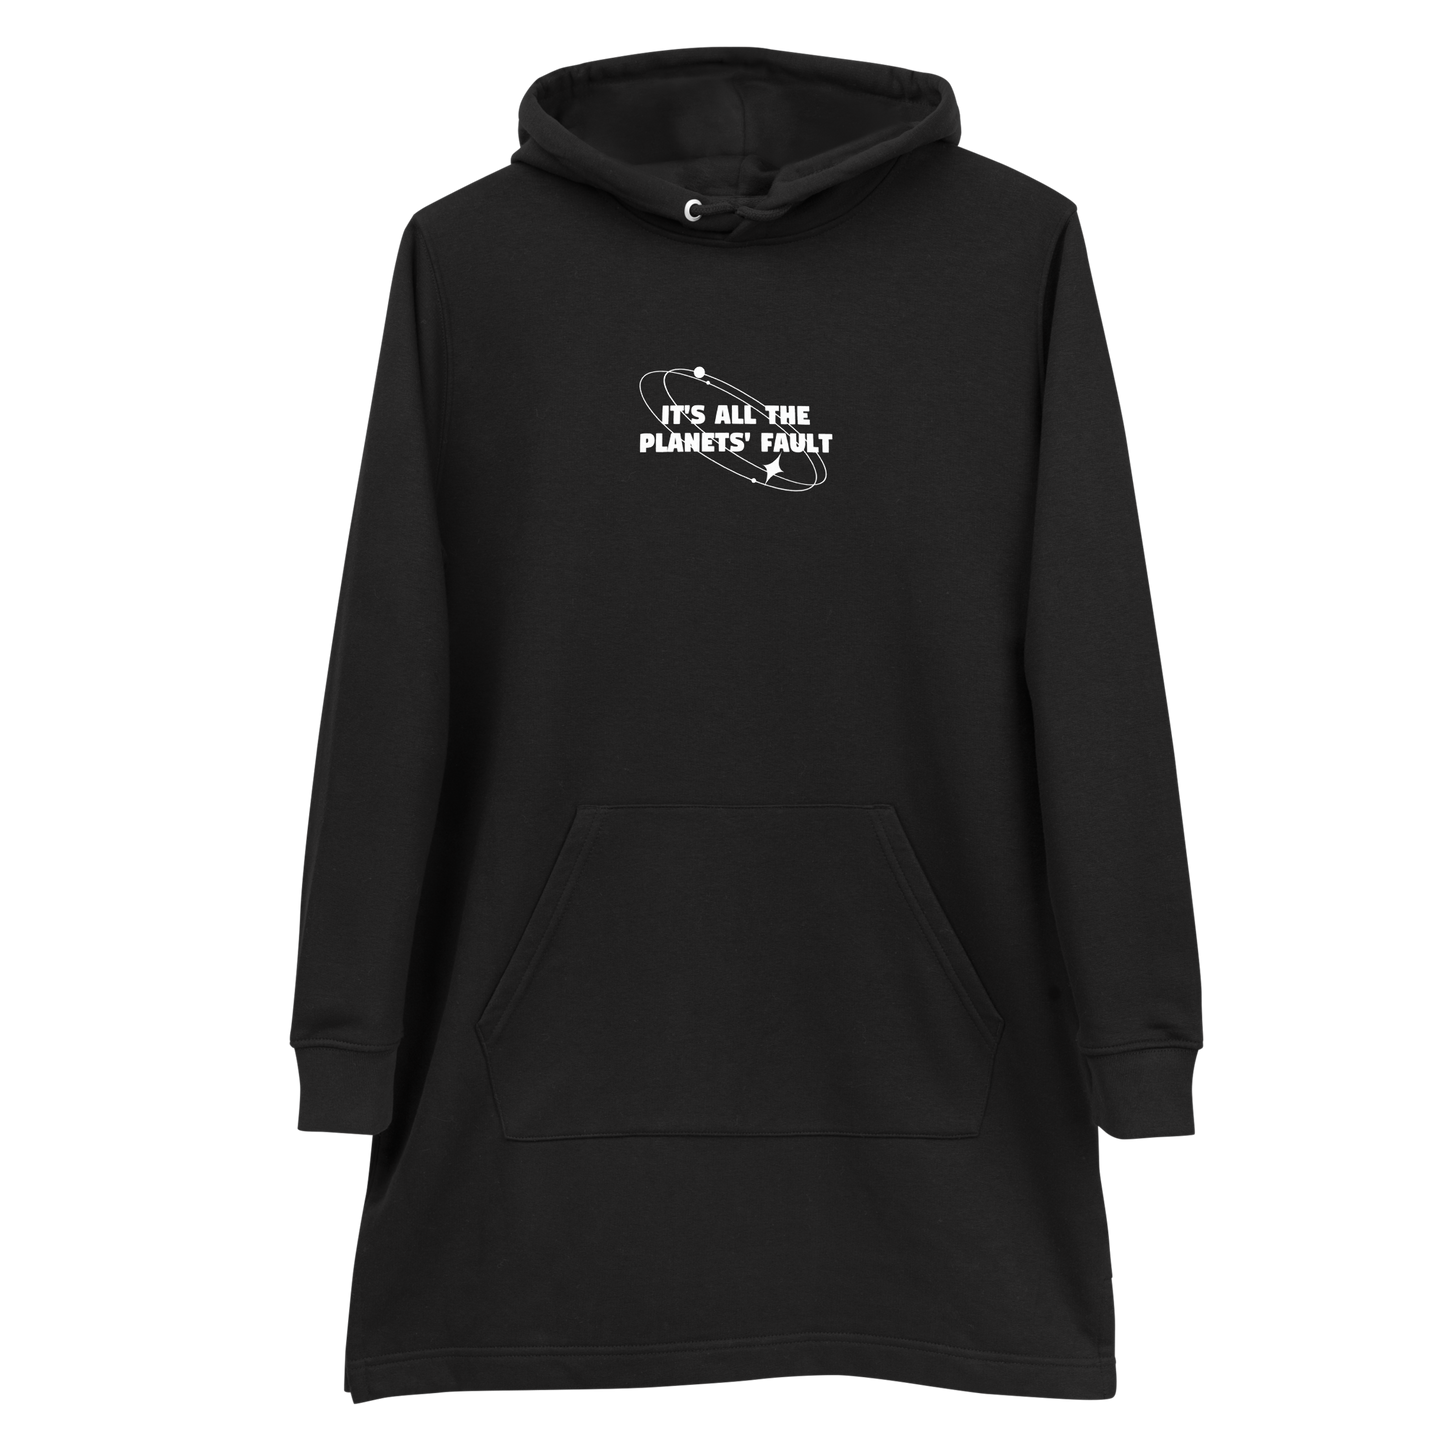 PLANETS' FAULT | Hoodie Dress